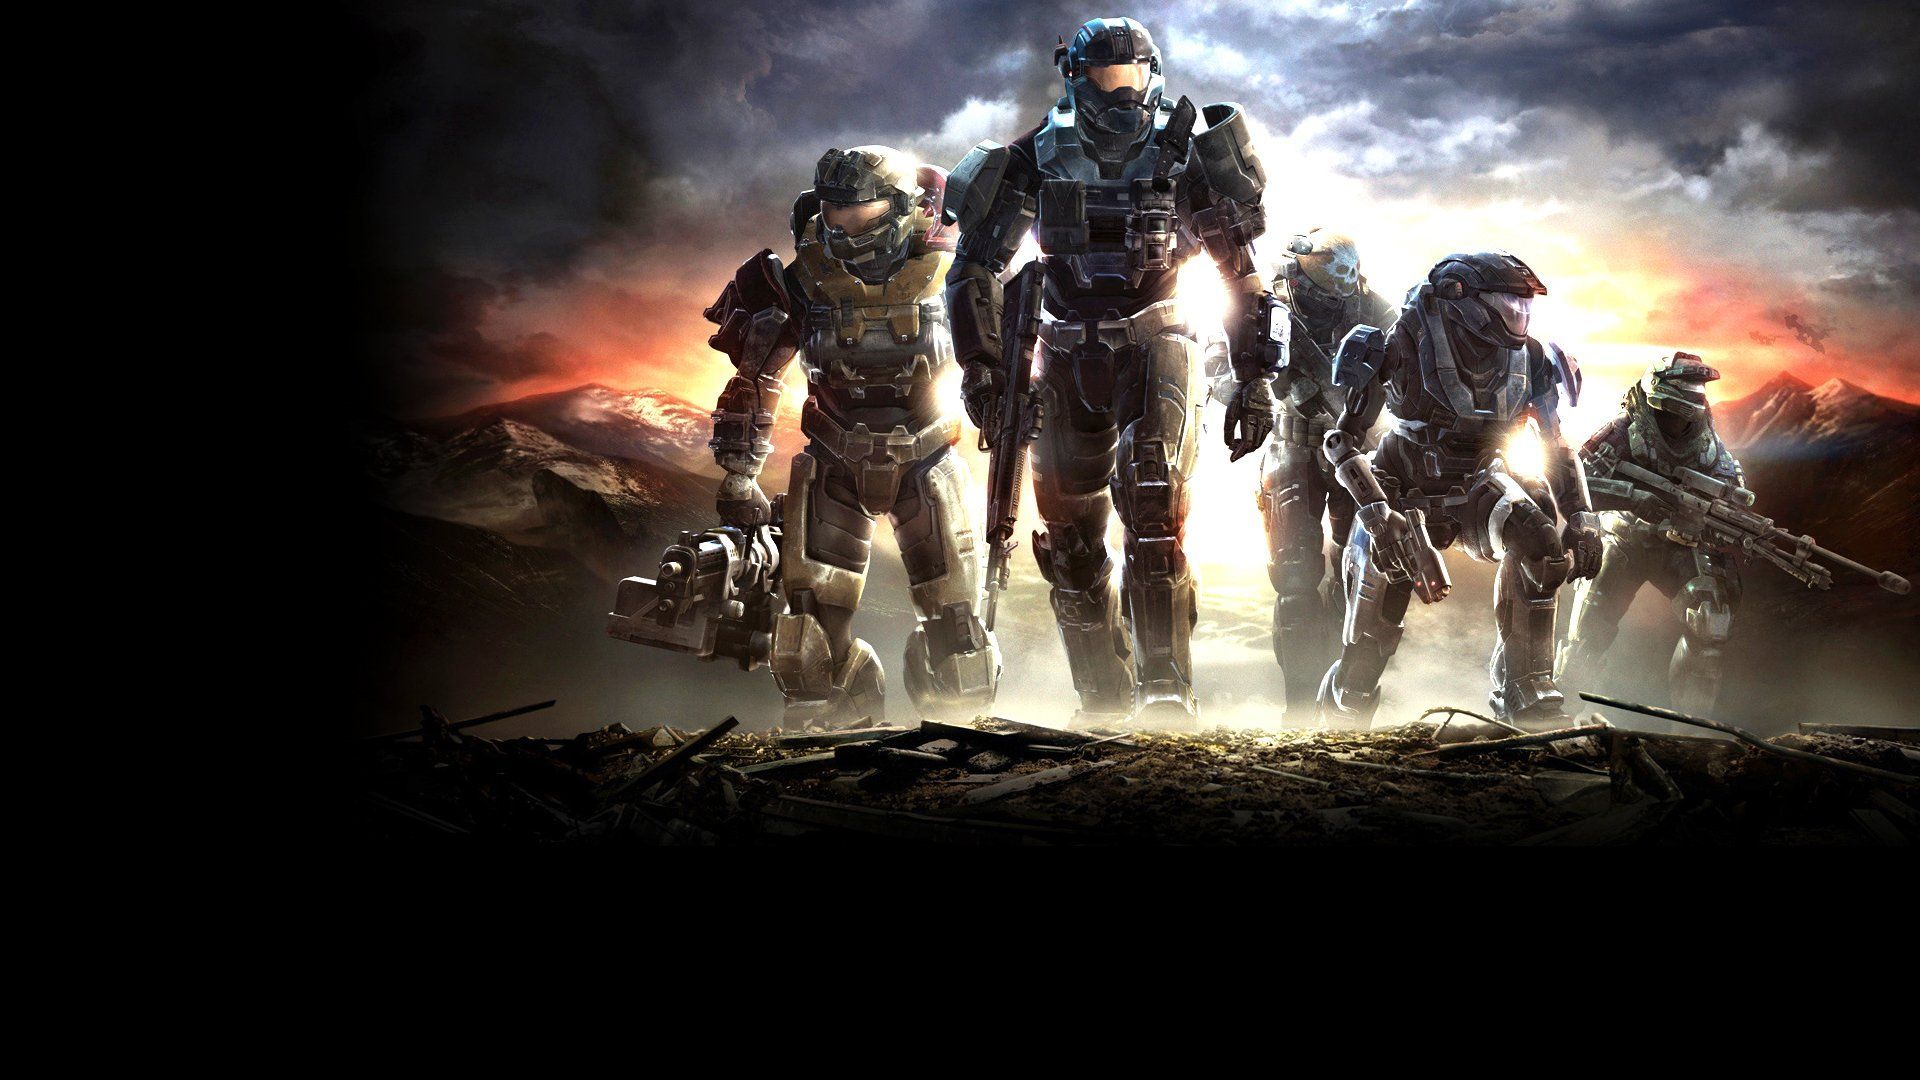 Download HD Halo Wallpapers For Desktop Background Free | HD ...